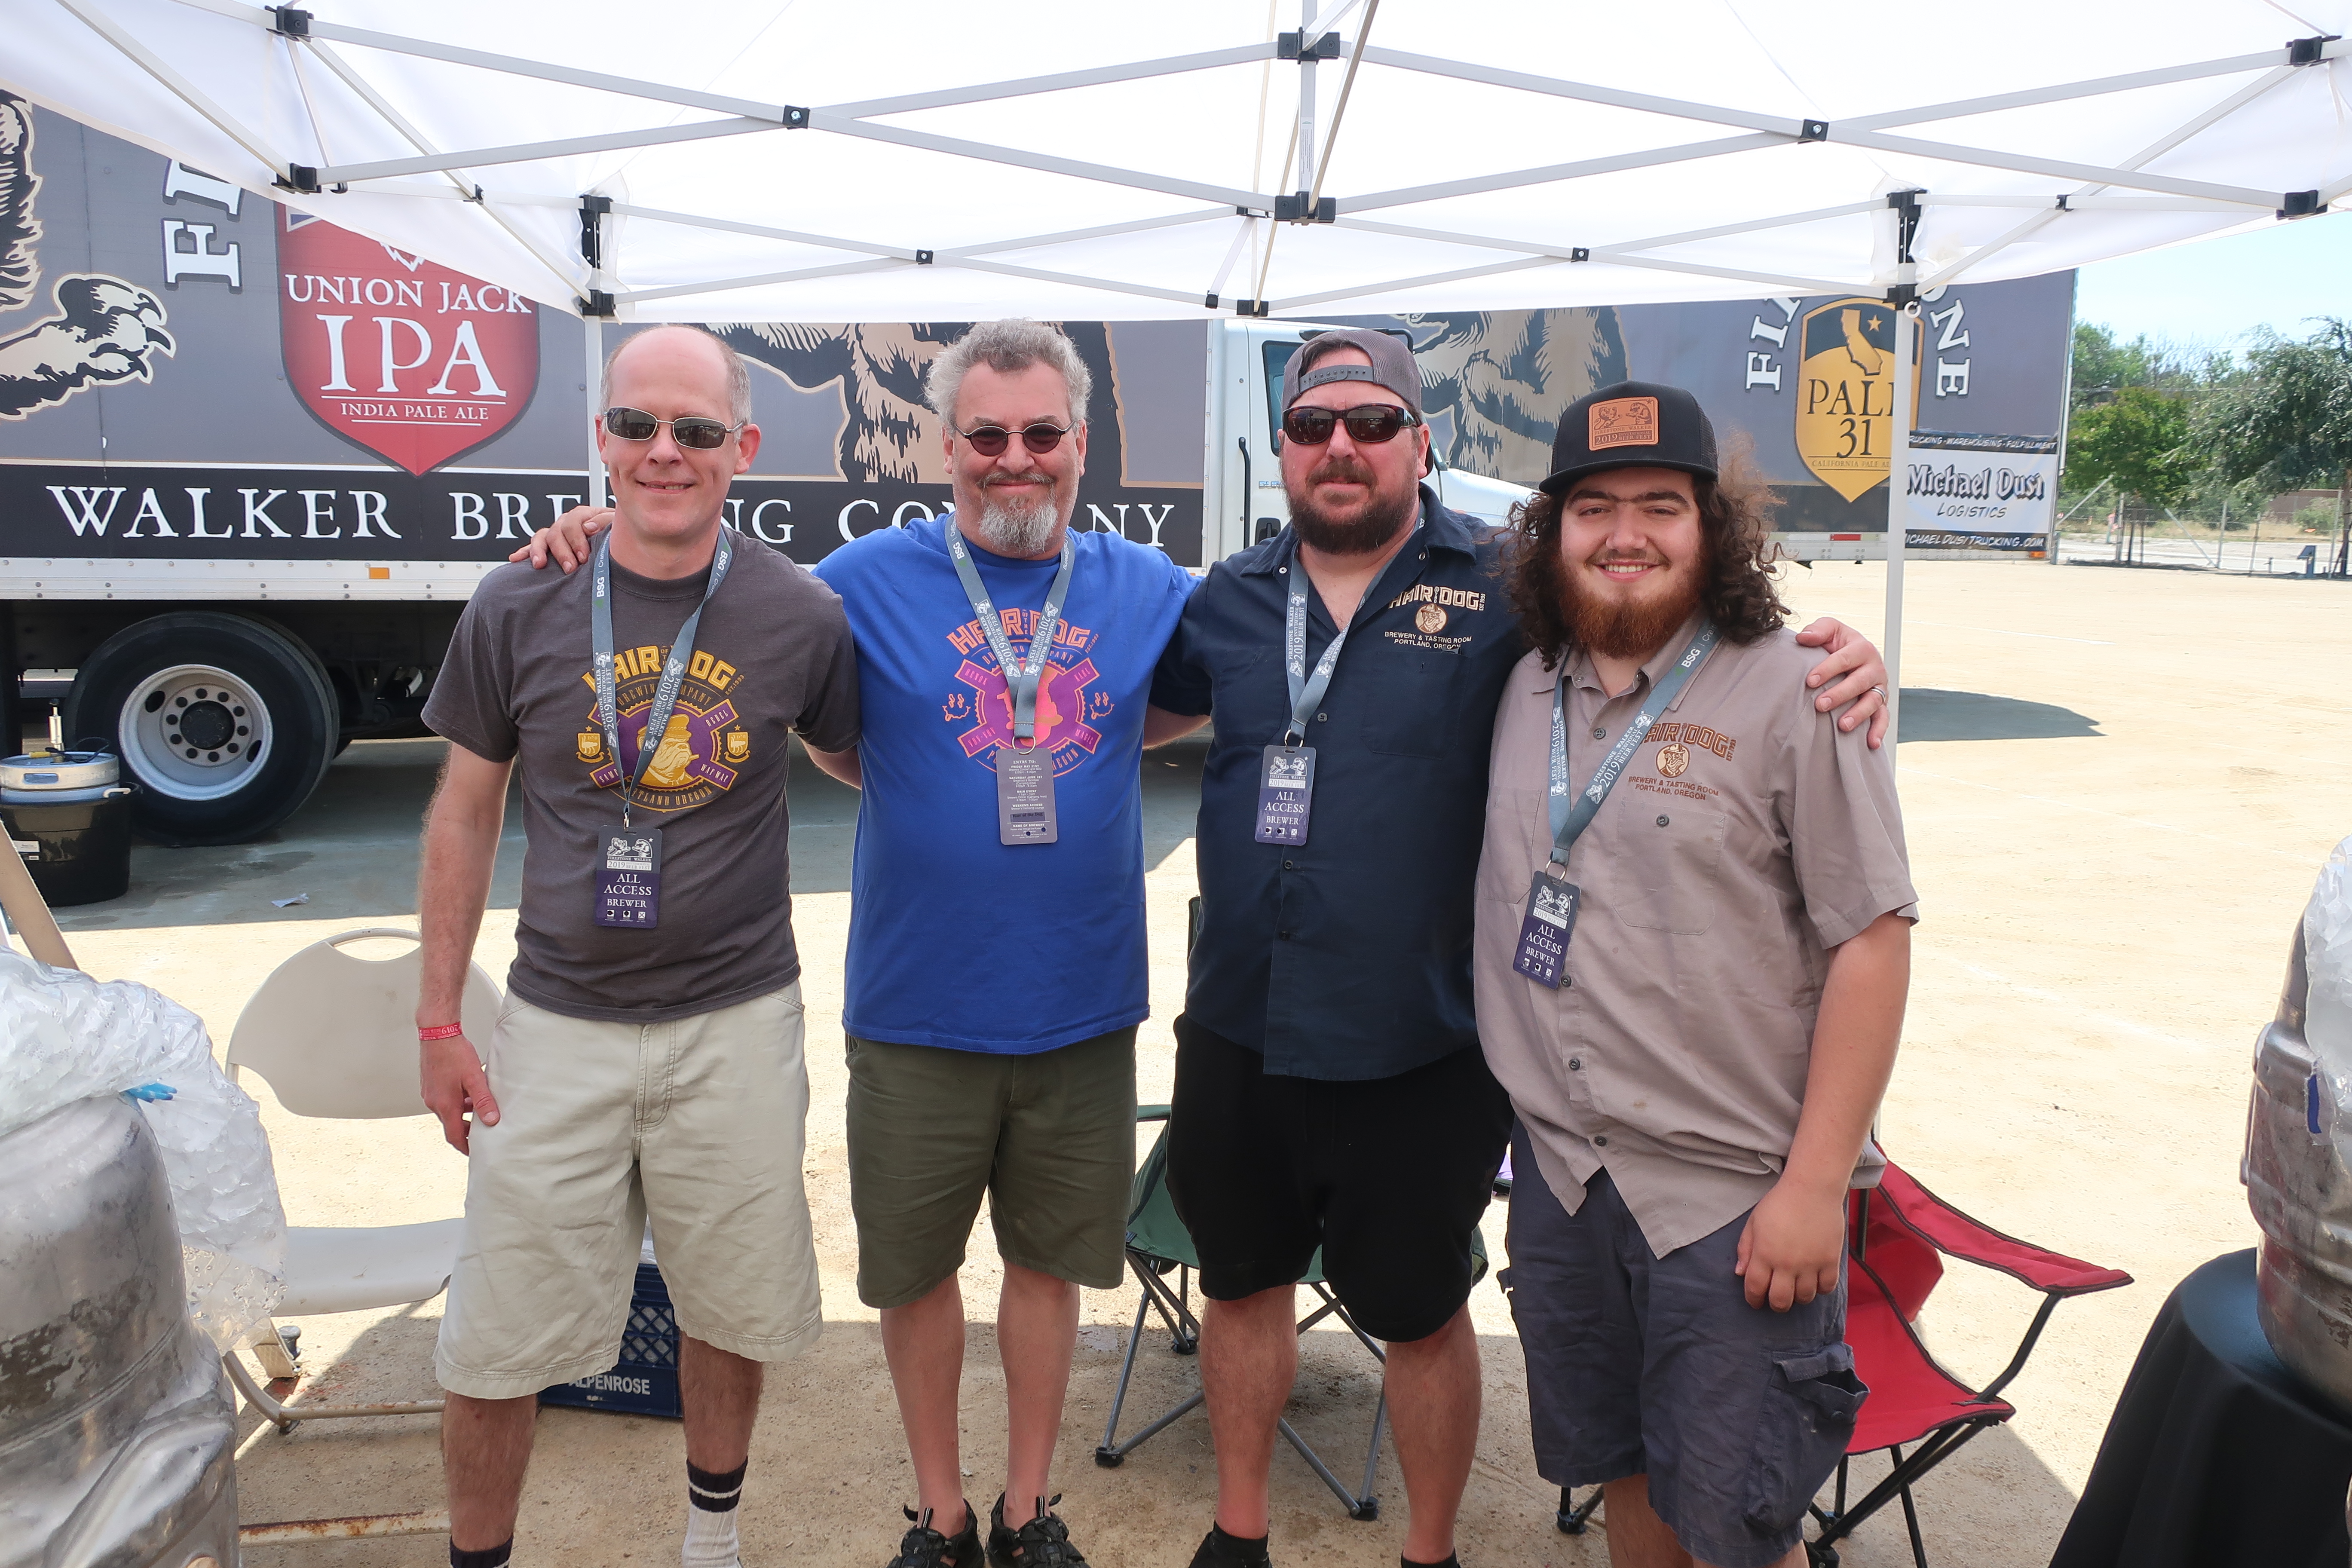 The crew from Hair of the Dog Brewing at the 2019 Firestone Walker Invitational Beer Fest.